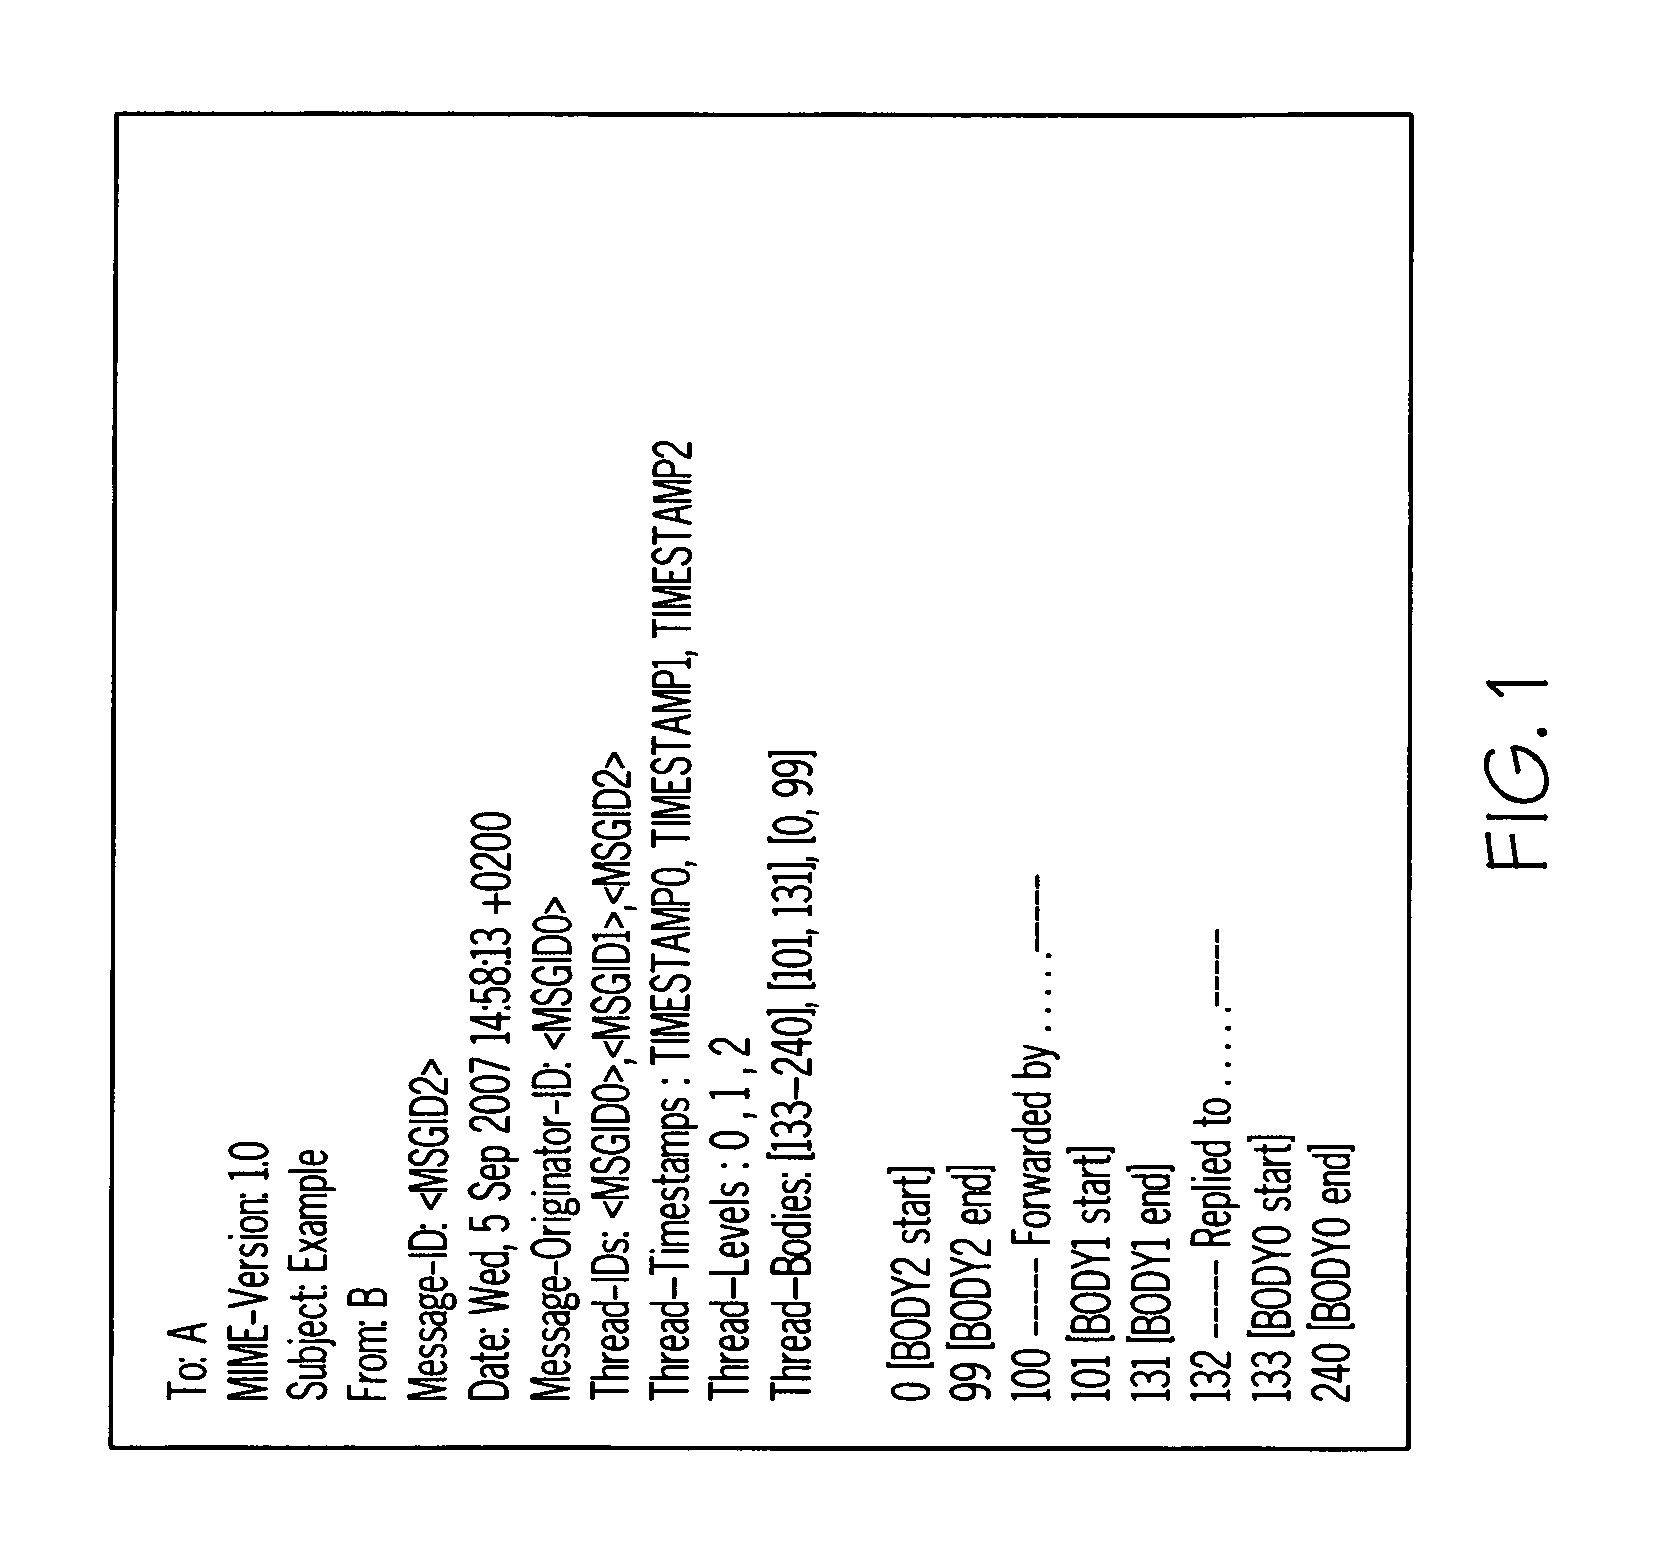 Thread based view and archive for simple mail transfer protocol (SMTP) clients devices and methods